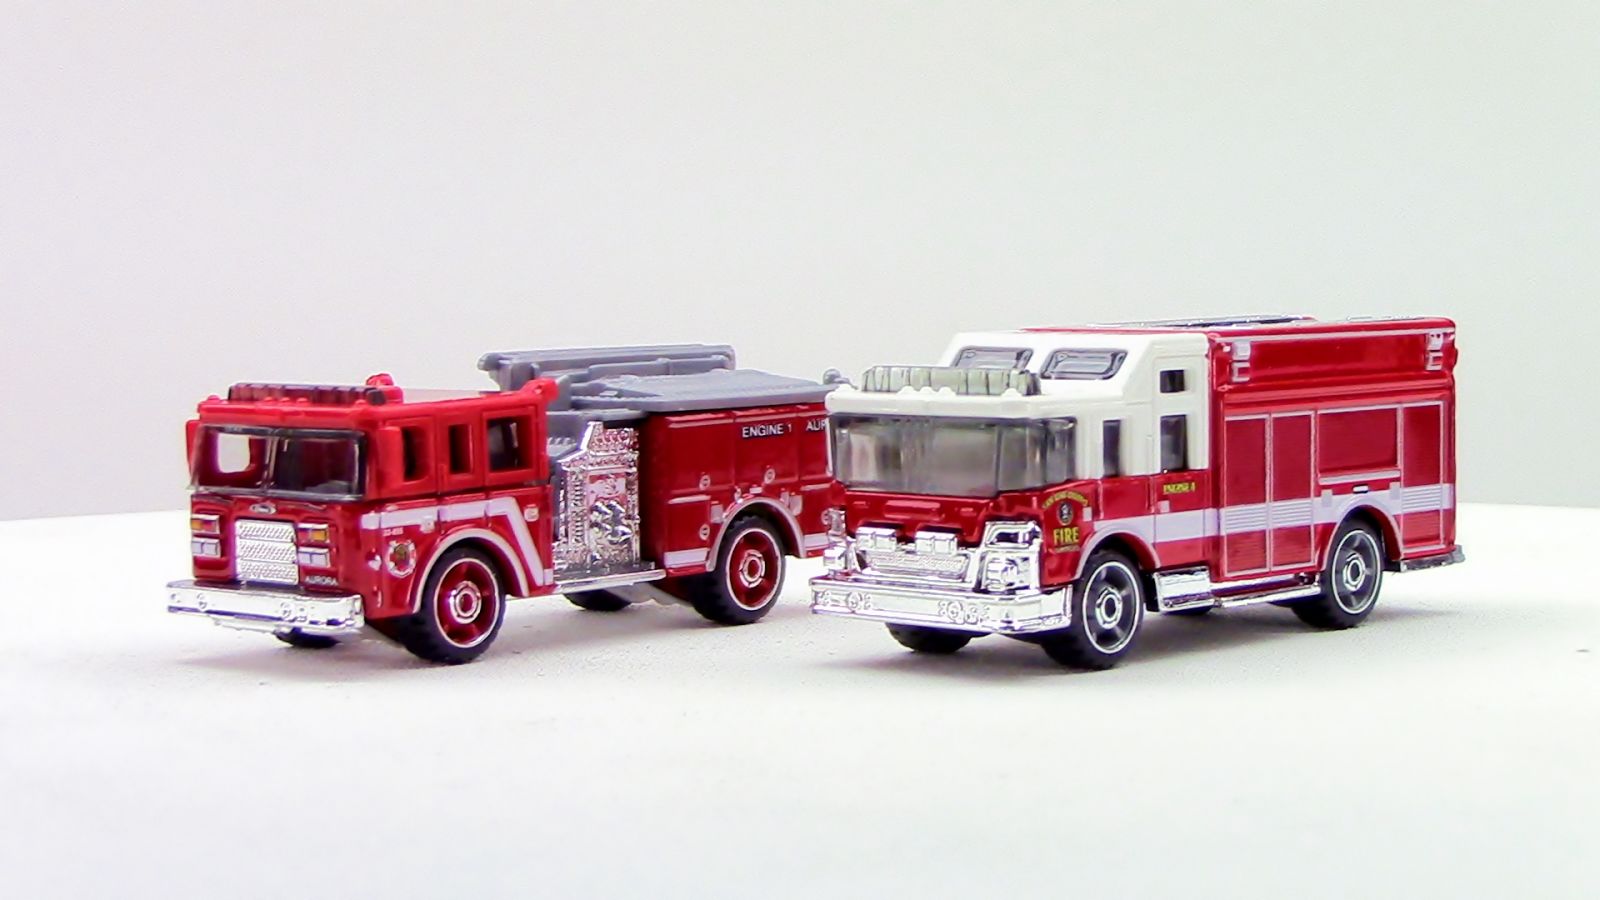 Illustration for article titled Video Review: Matchbox Supreme Hero Collection Fire Engines.